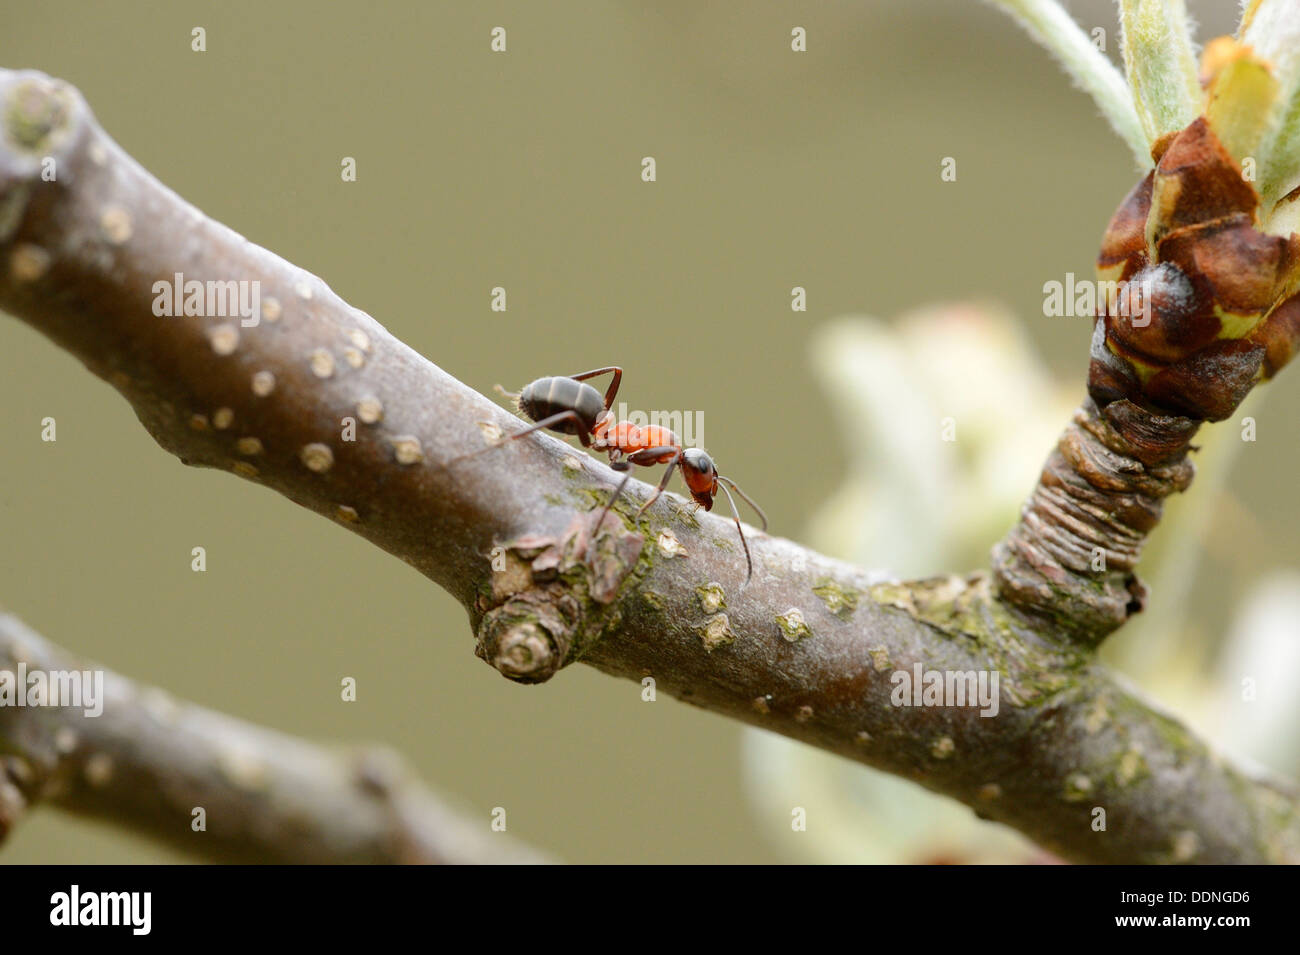 Red wood ant (Formica rufa) on a twig Stock Photo